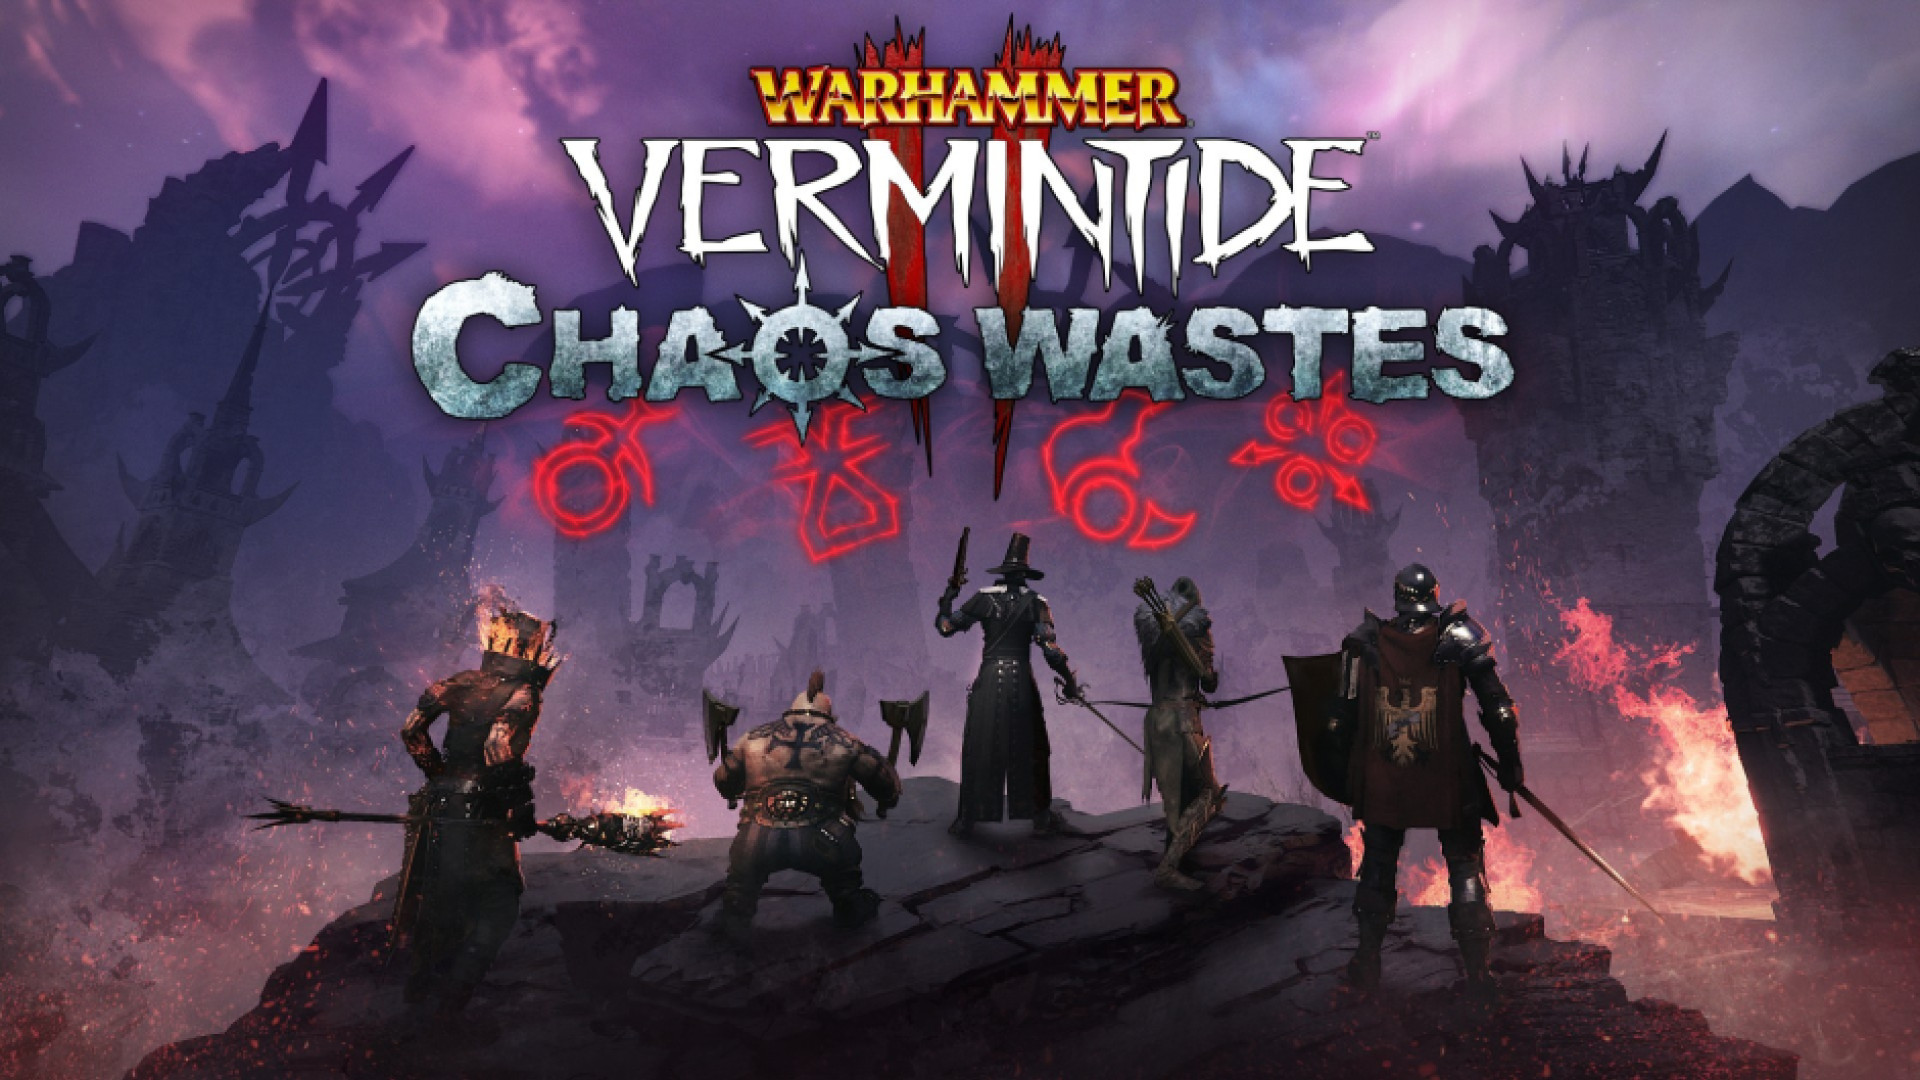 Vermintide 2 - Chaos Wastes